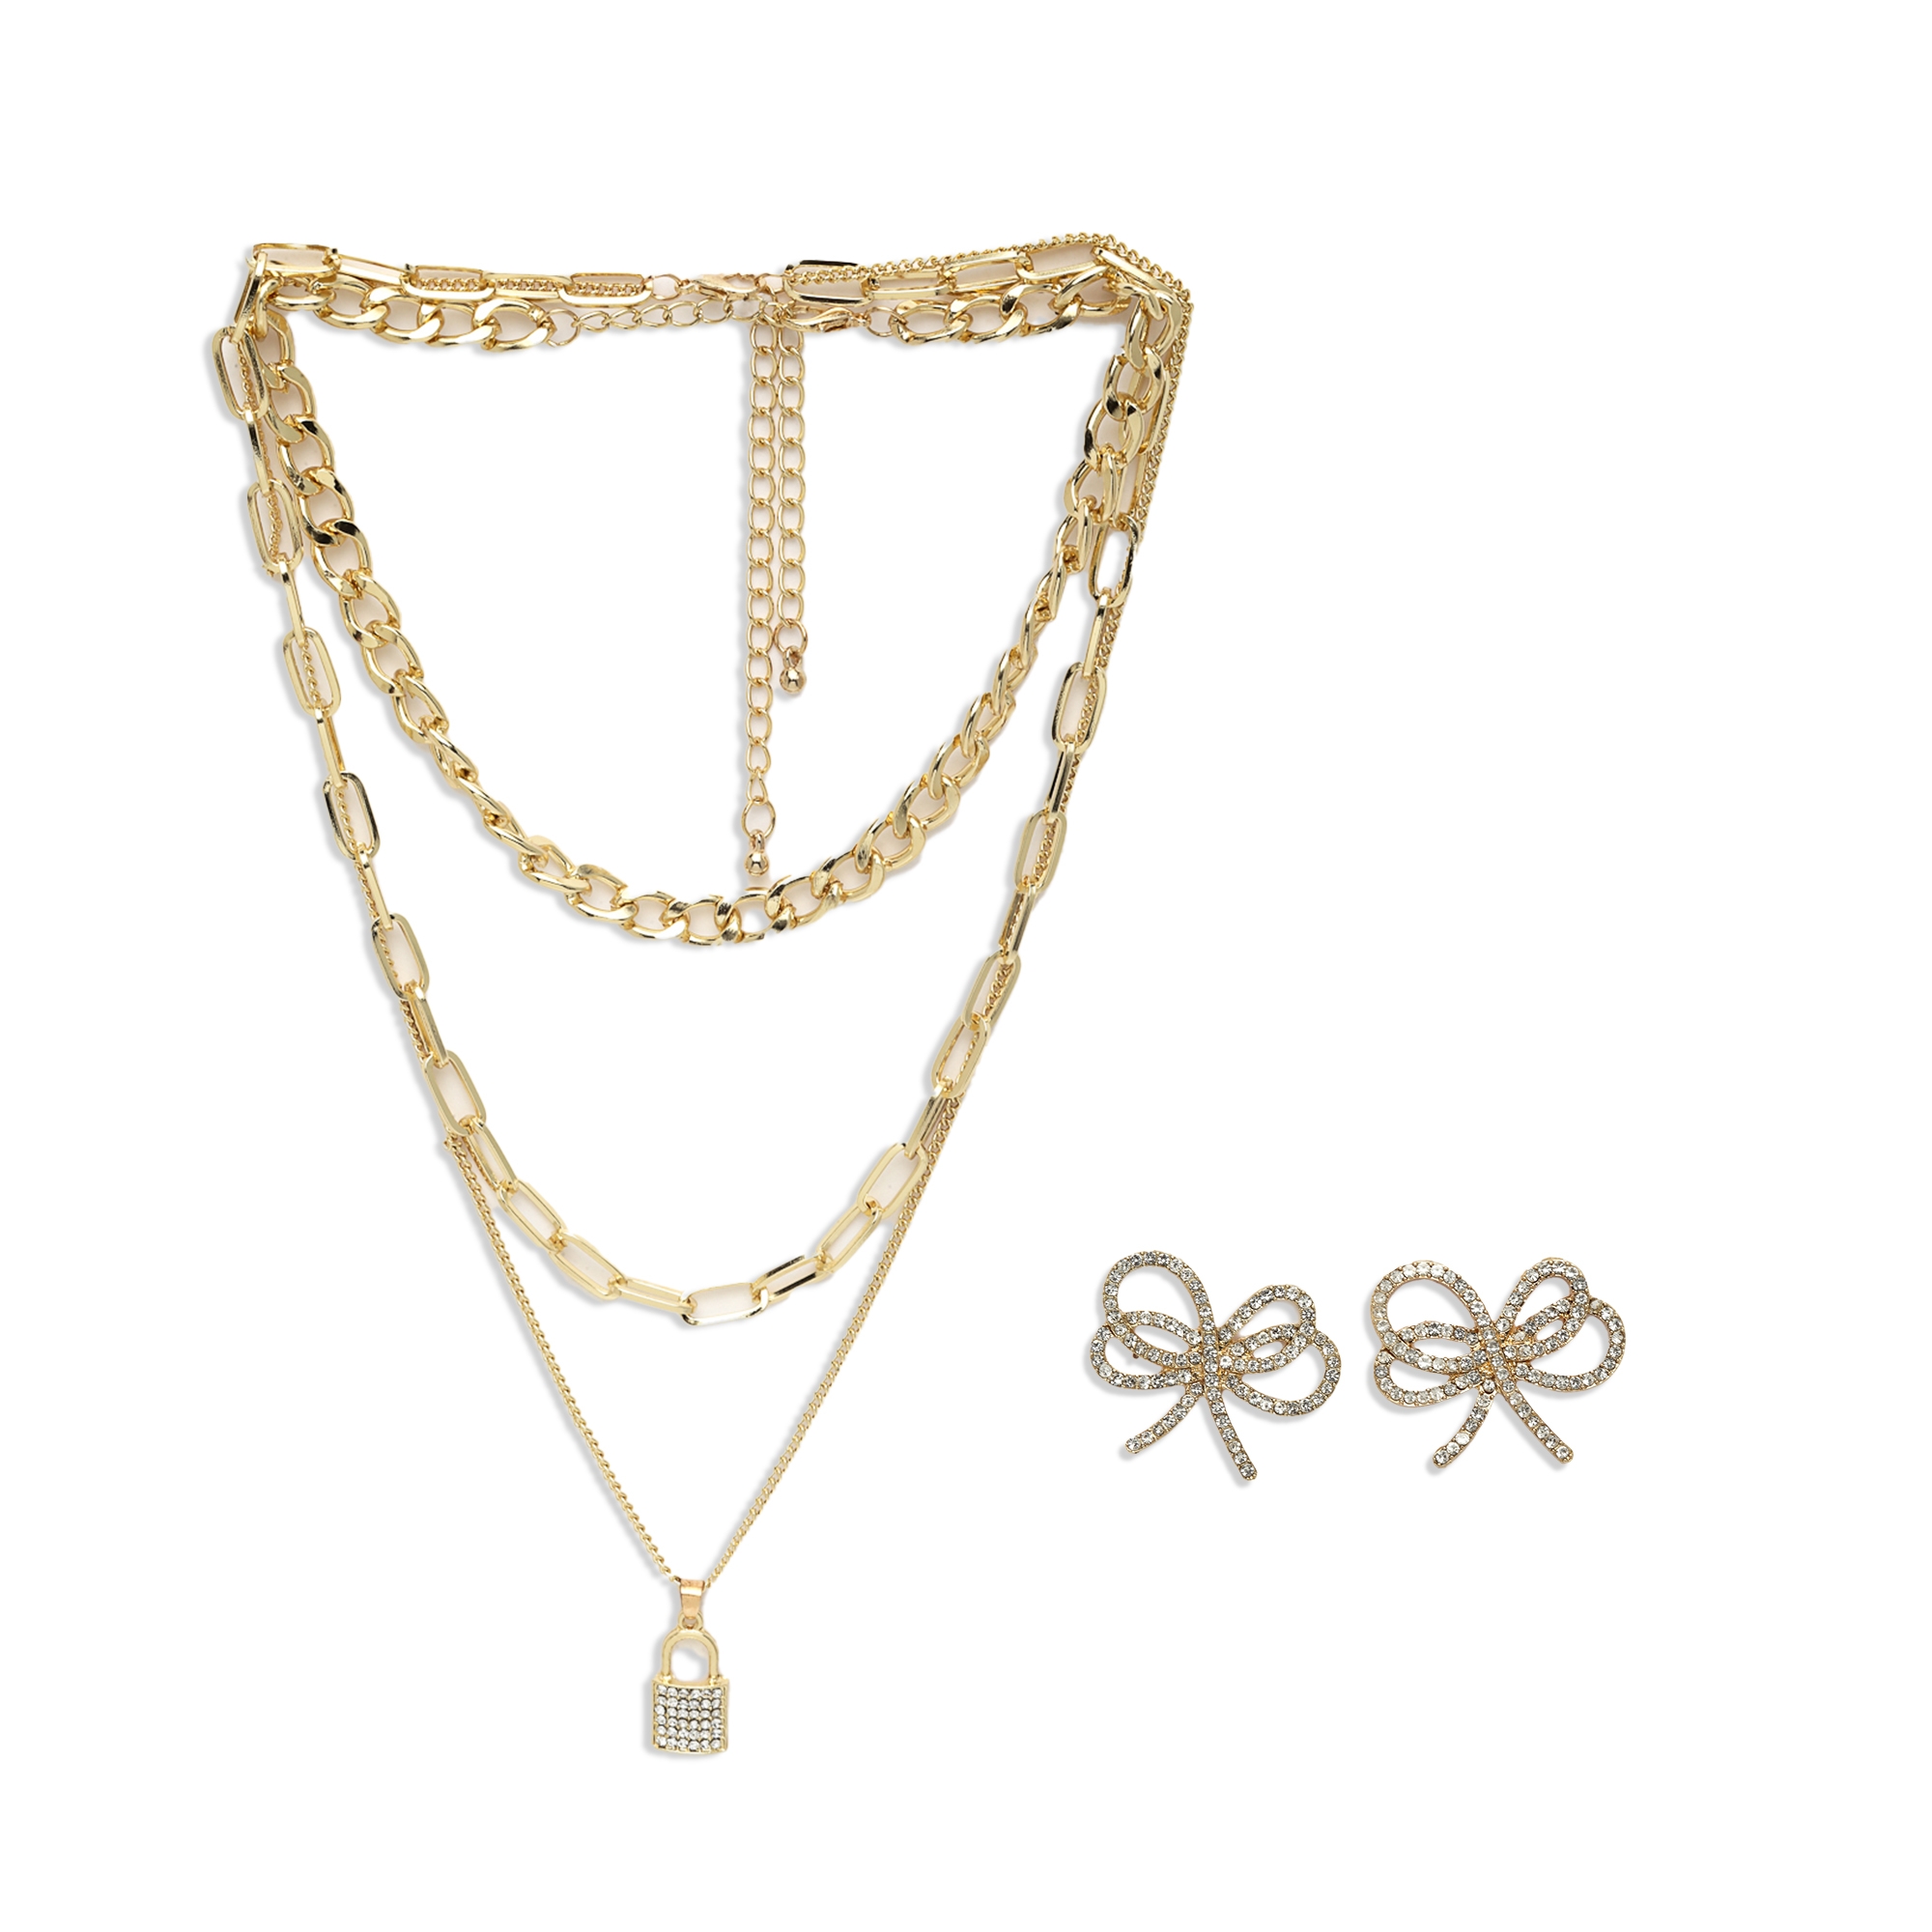 Best Gold Chain Jewelry Bundle Set Gift | Best Aesthetic Yellow Gold Chain  Necklace, Bracelet Jewelry